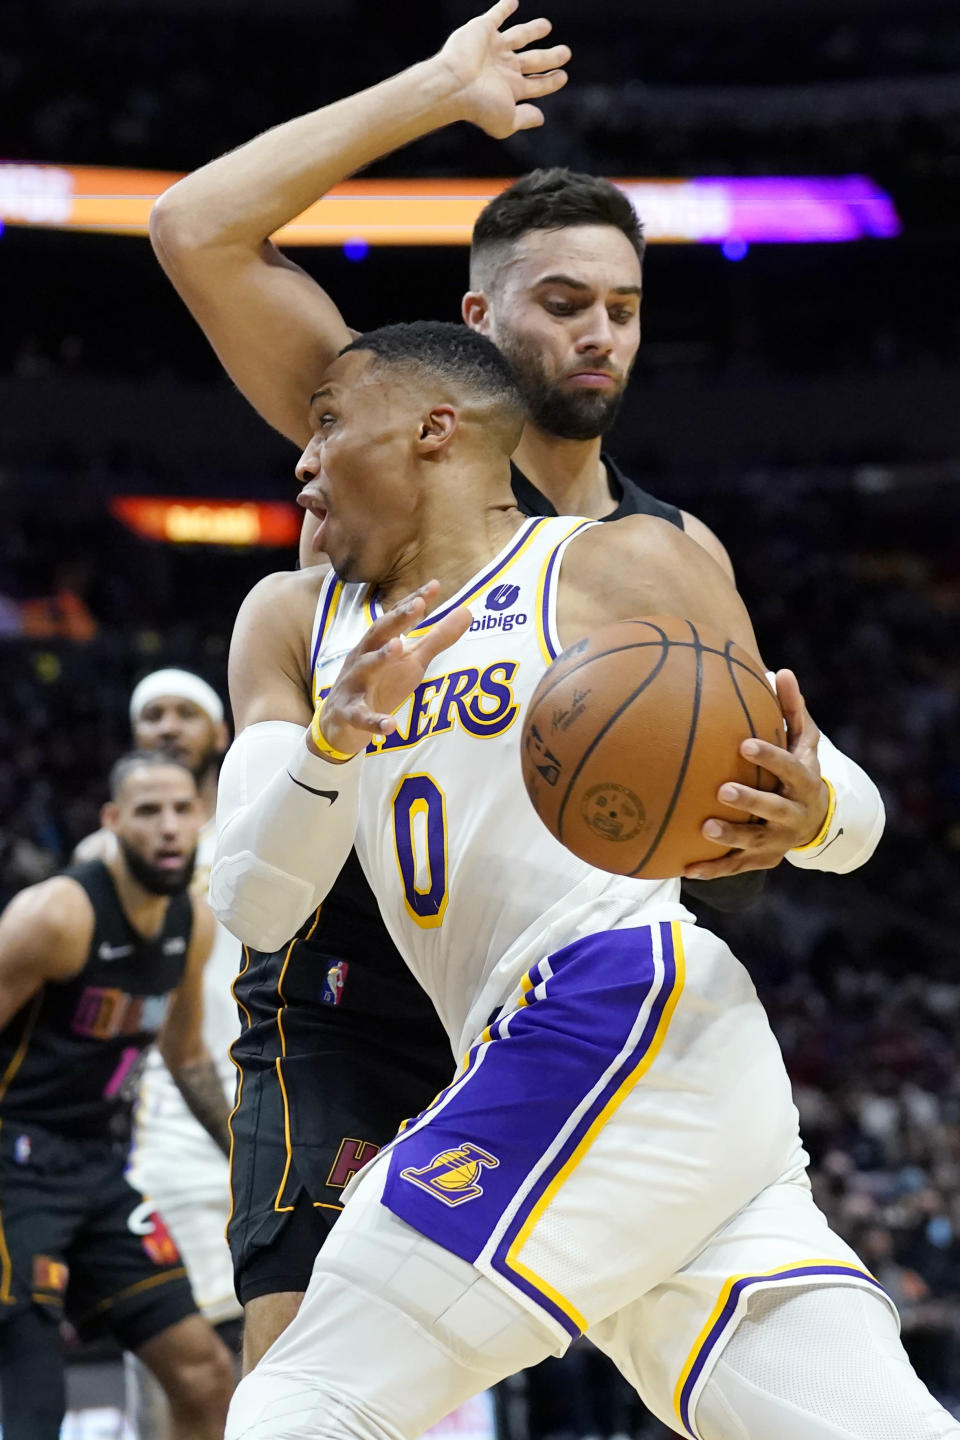 Los Angeles Lakers guard Russell Westbrook (0) drives to the basket as Miami Heat guard Max Strus defends during the first half of an NBA basketball game, Sunday, Jan. 23, 2022, in Miami. (AP Photo/Lynne Sladky)